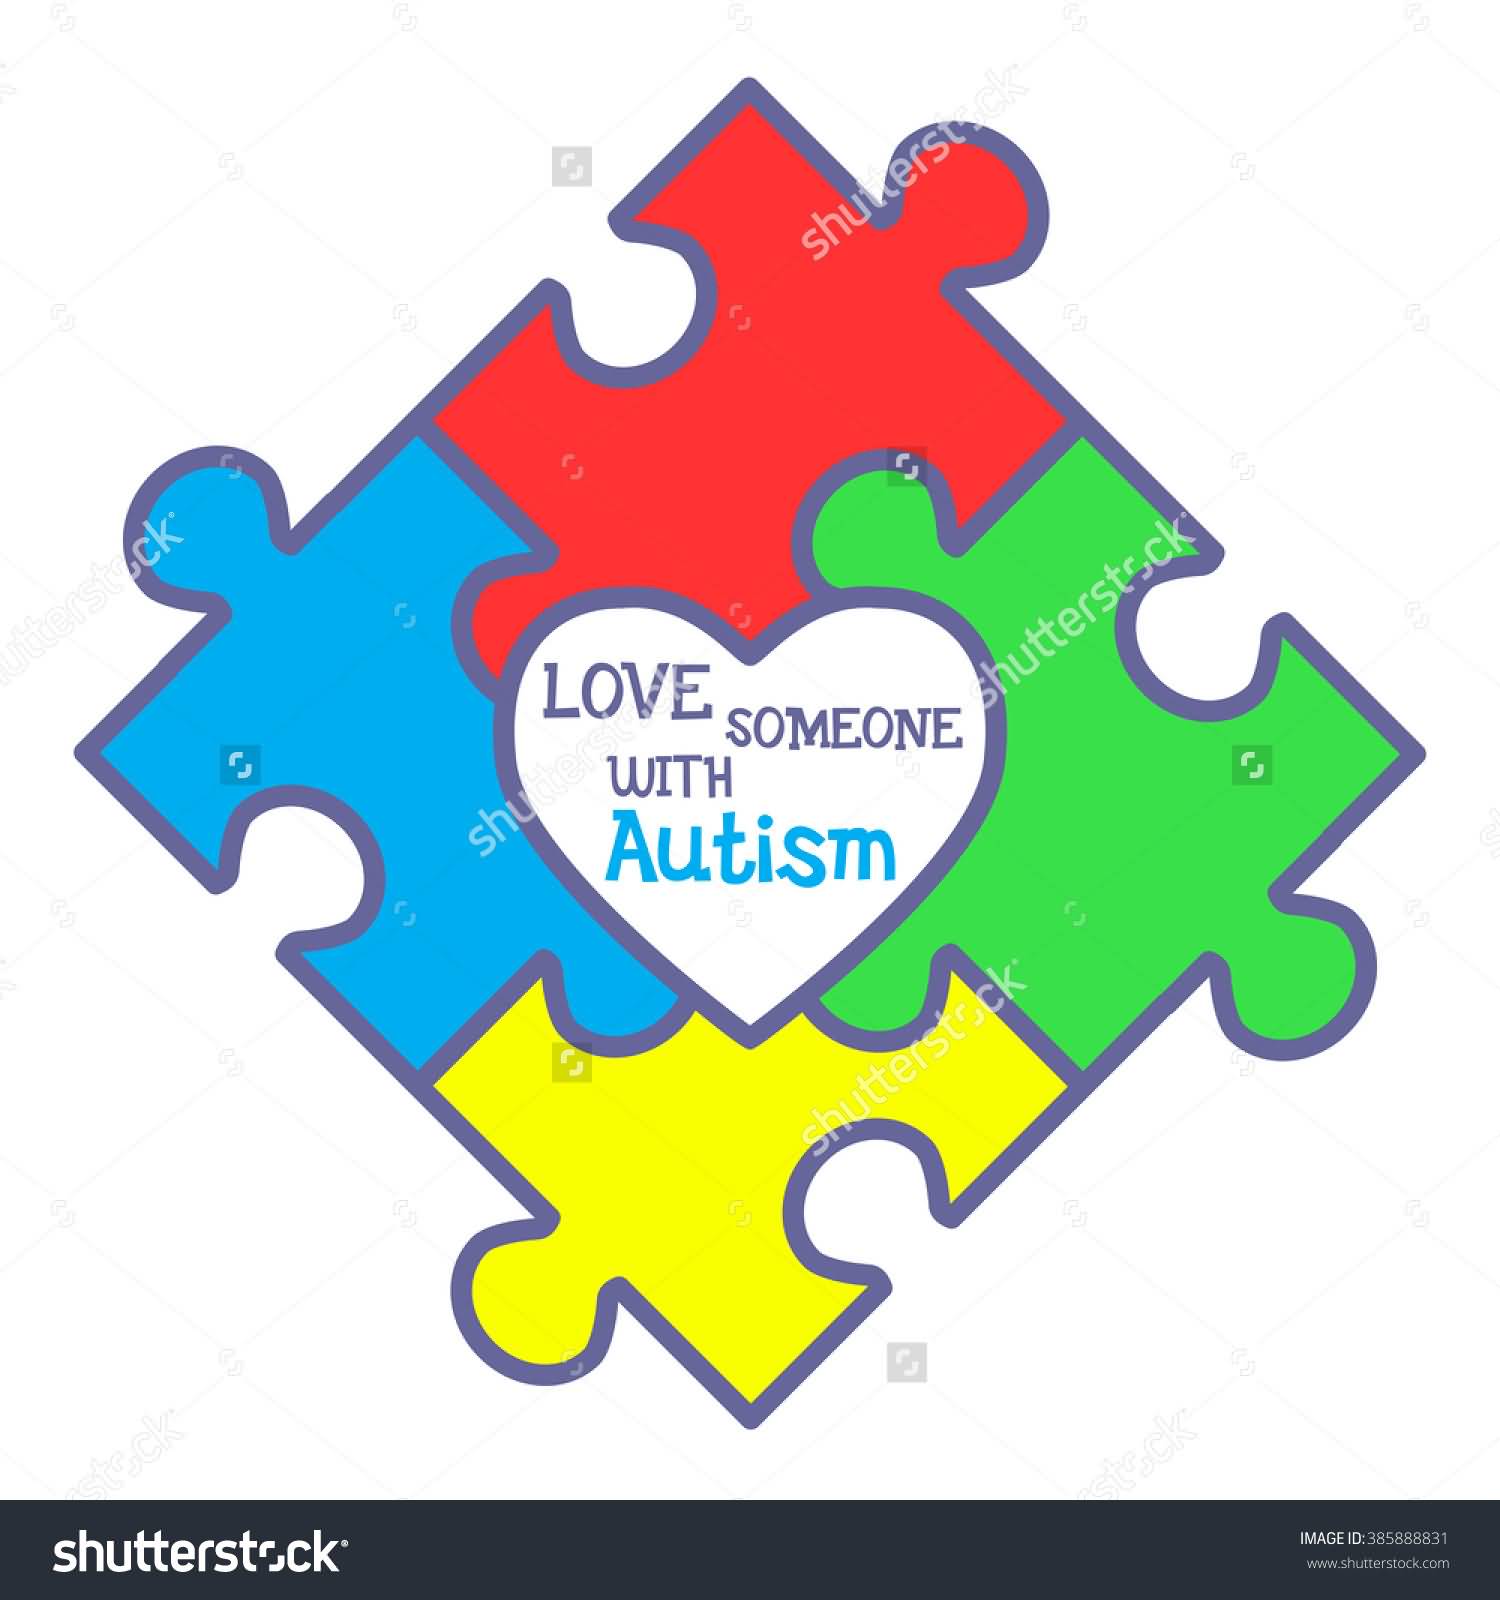 Someone with world awareness. Autism clipart love